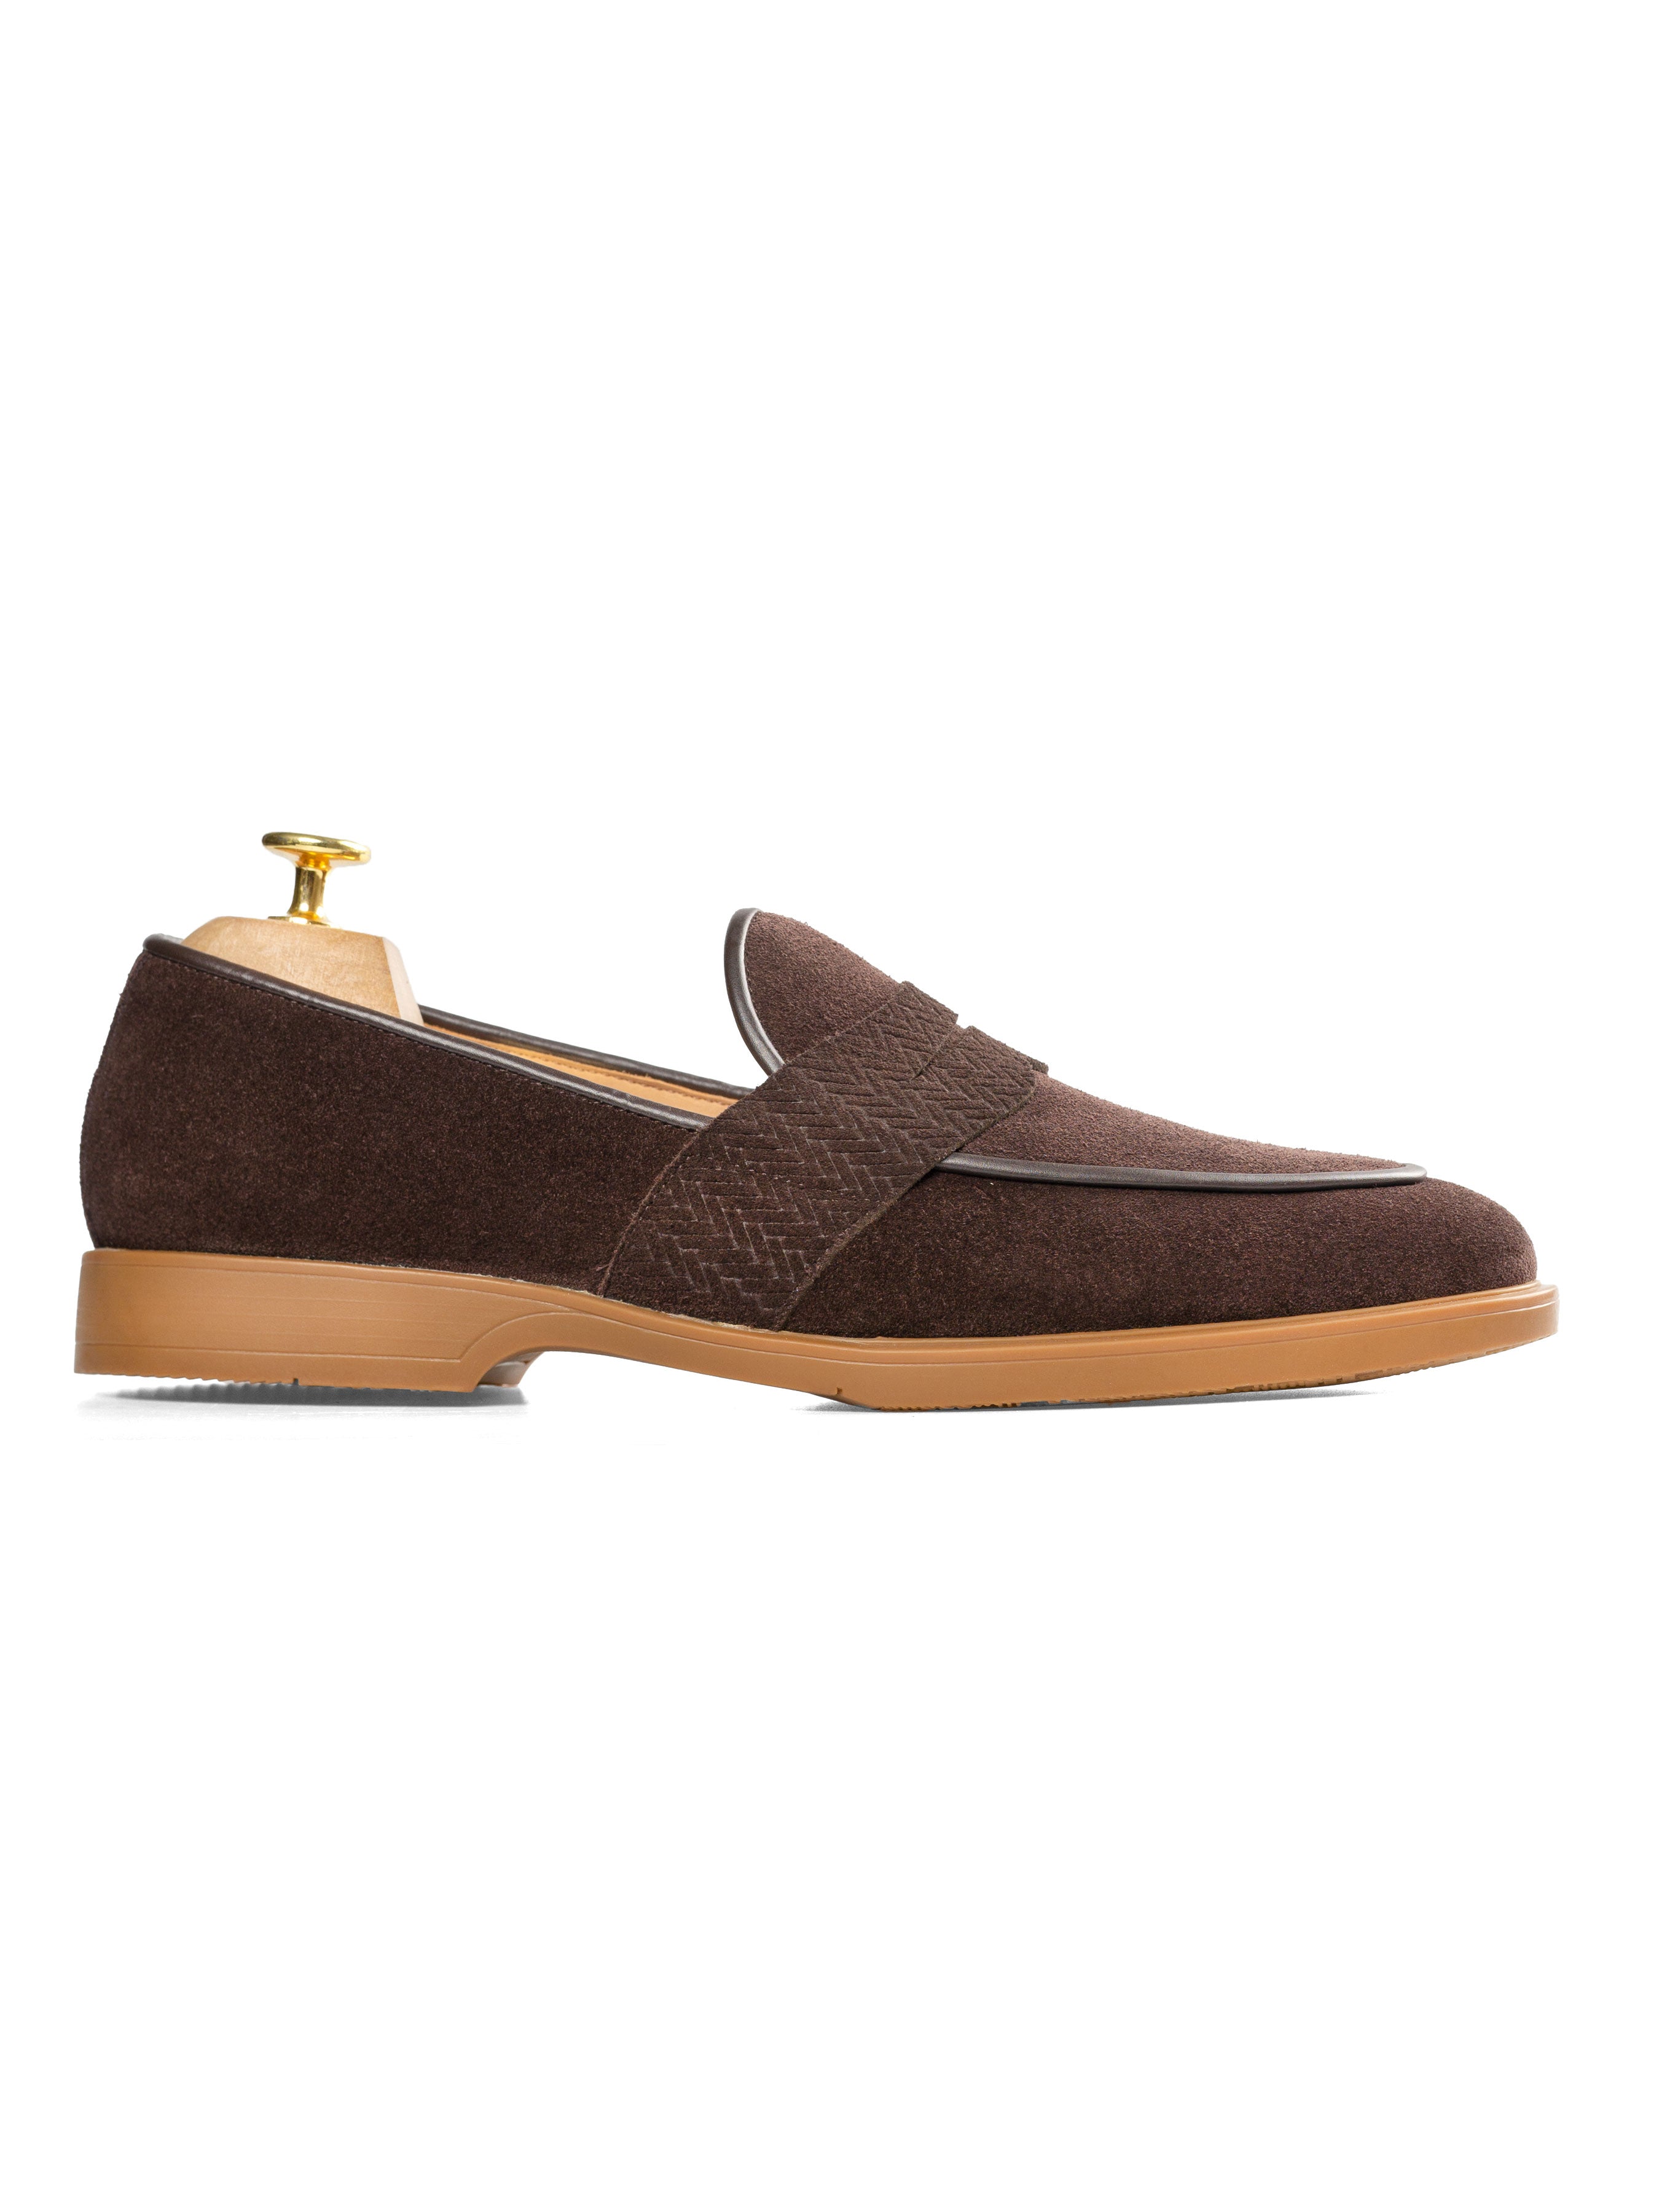 Belgian Loafer Penny - Coffee Suede Leather (Soflex Sole) - Zeve Shoes